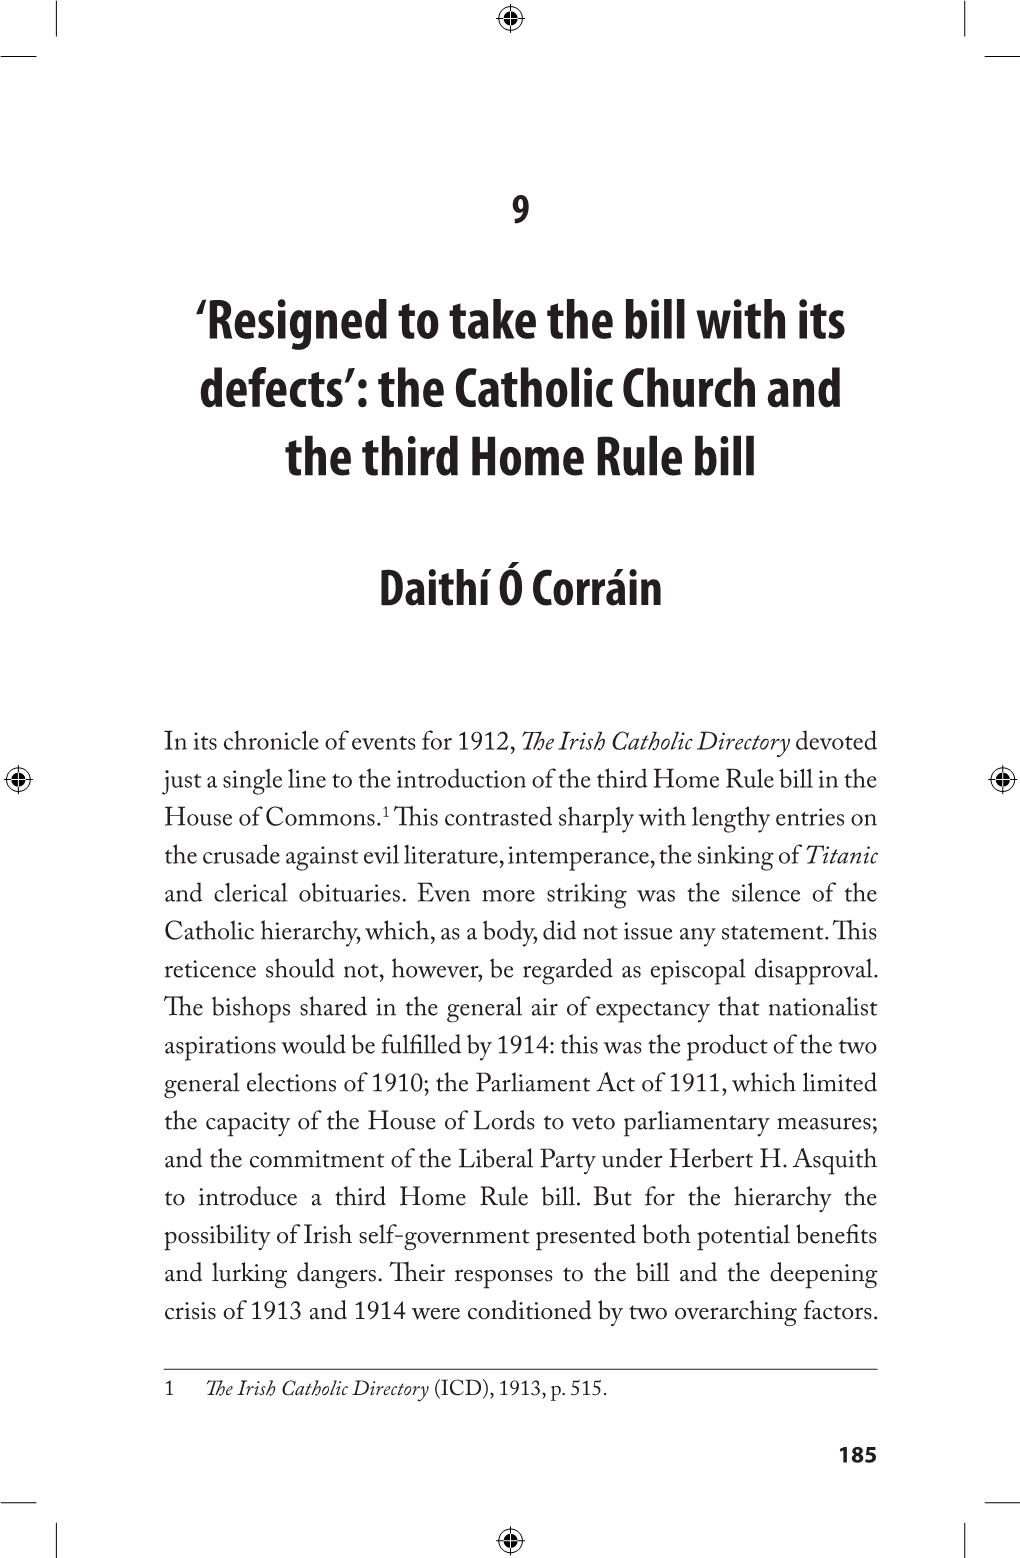 The Catholic Church and the Third Home Rule Bill